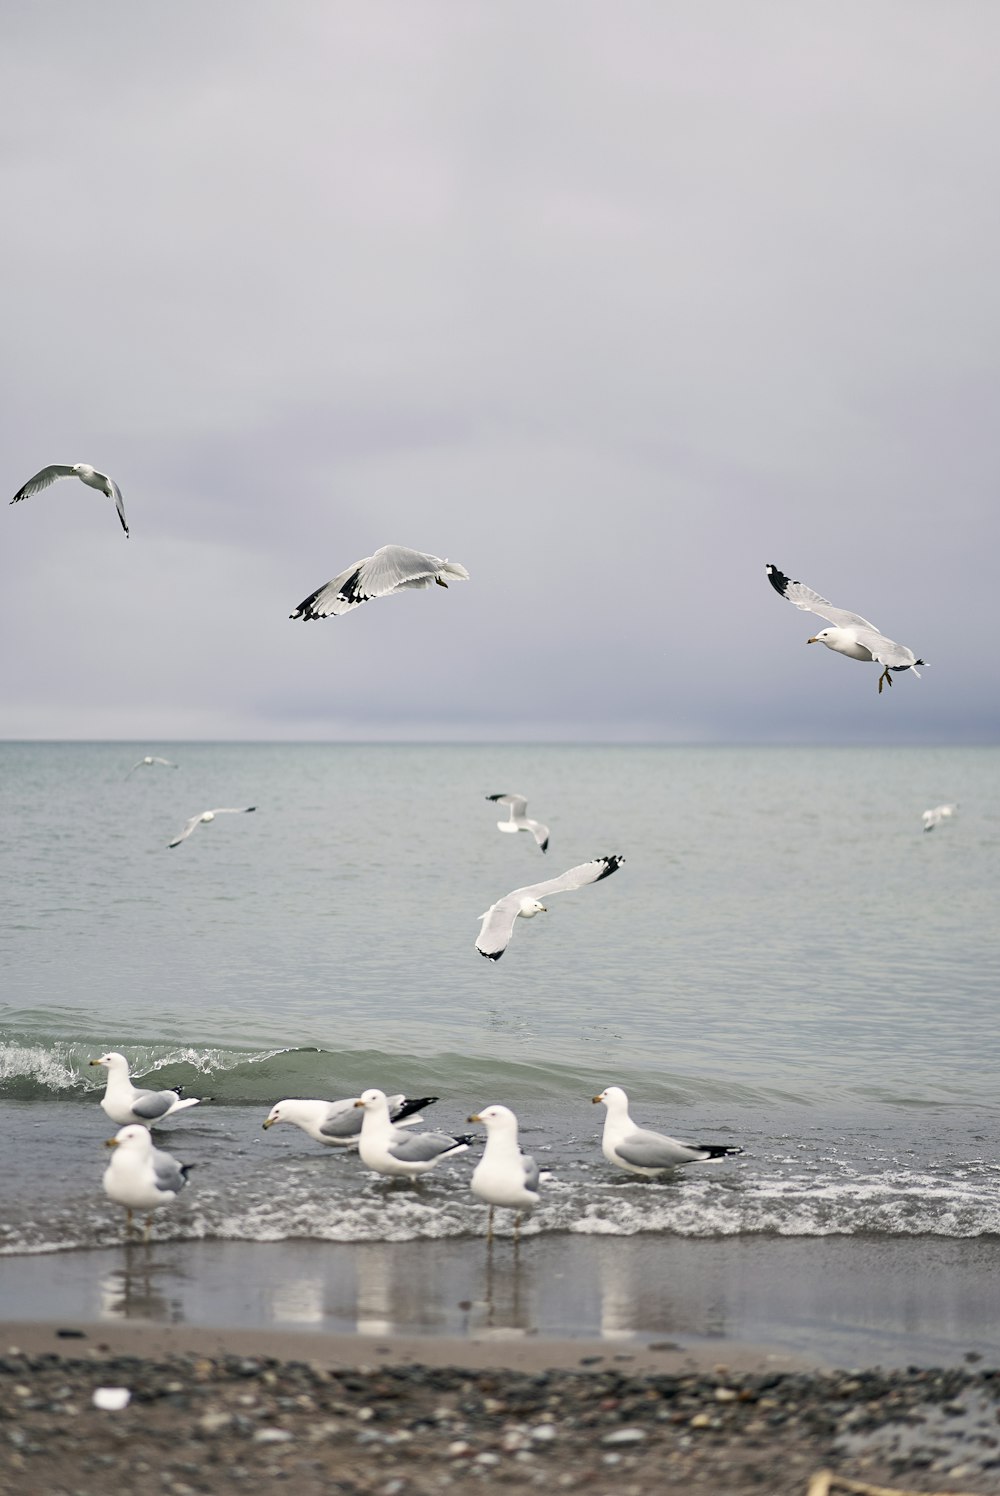 a flock of seagulls flying over the ocean